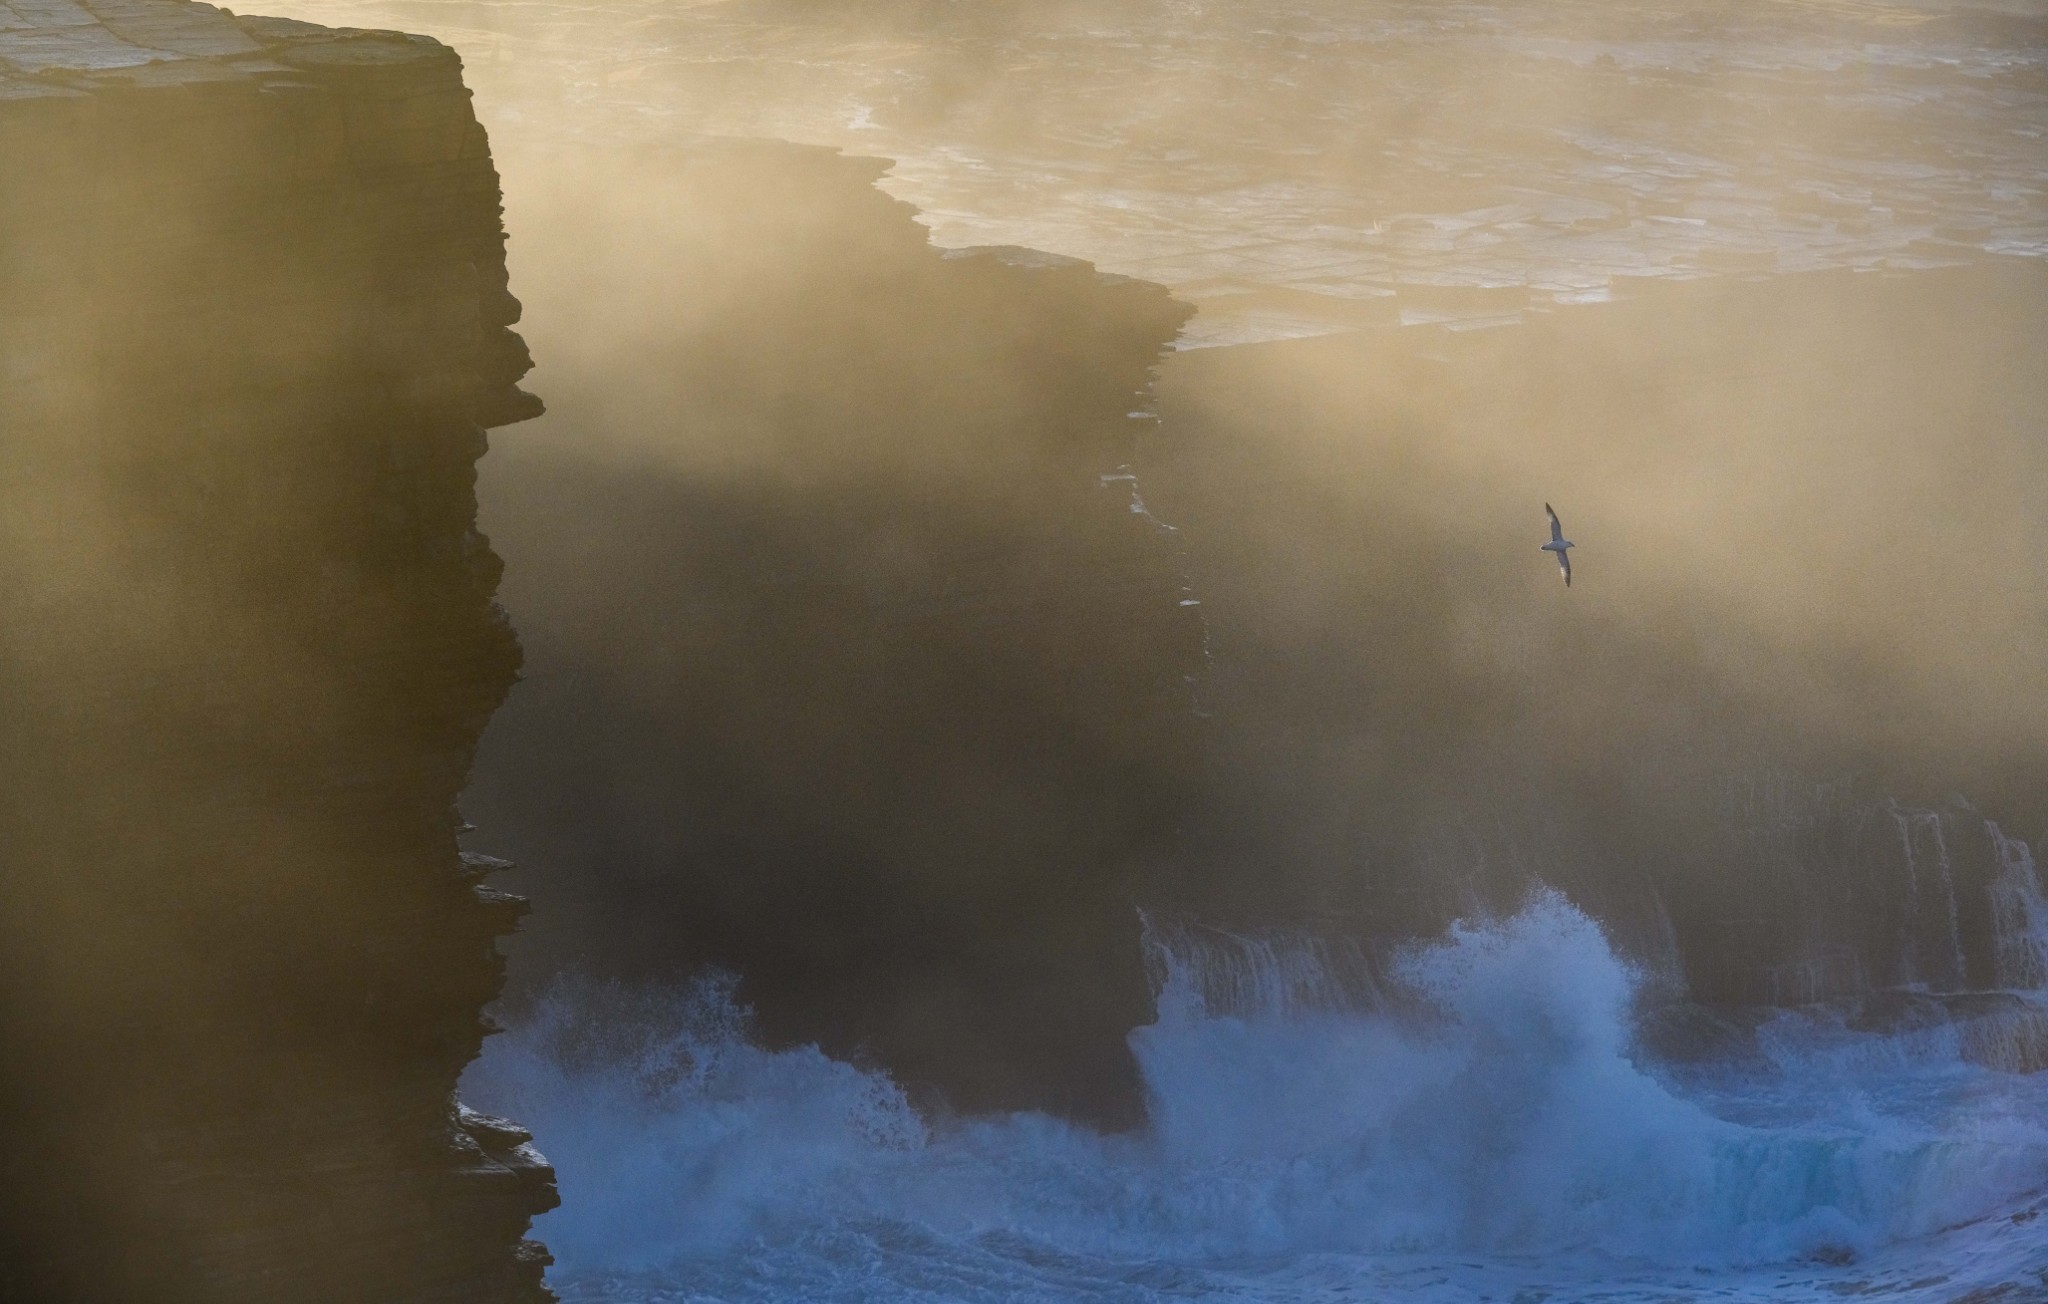 The cliffs at Yesnaby - image by Raymond Besant